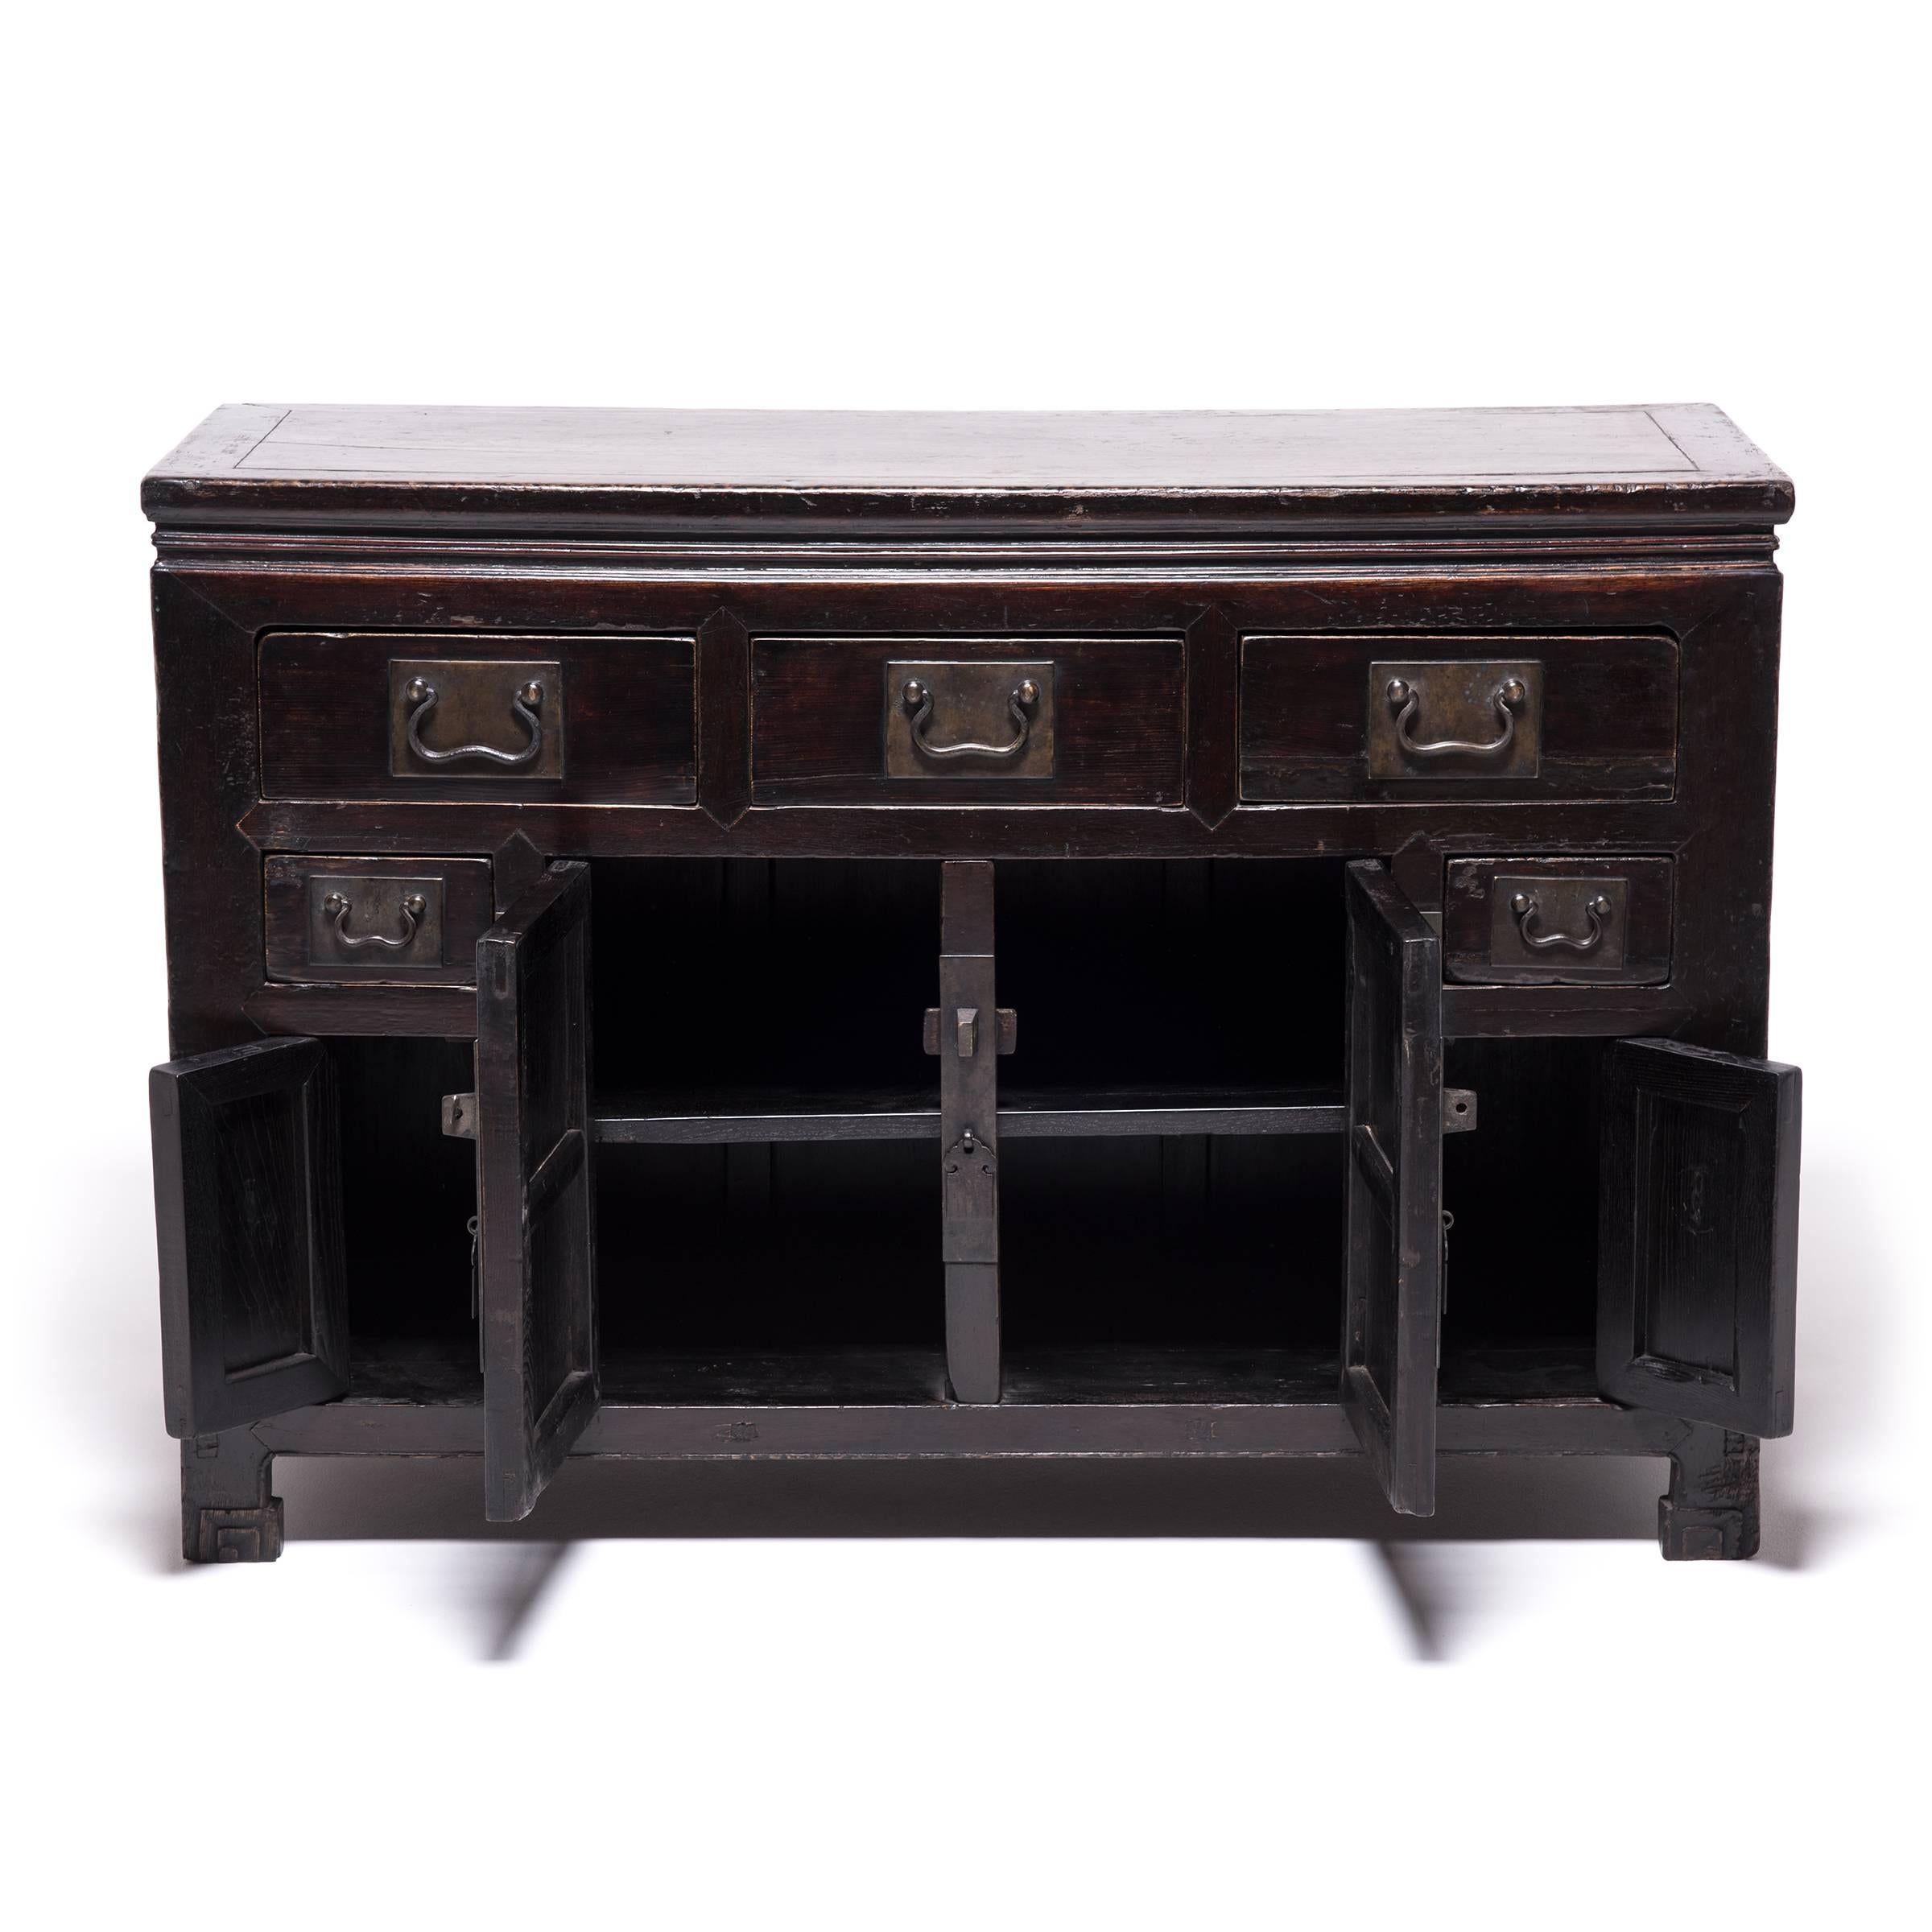 Made in Tianjin, a port city in Northern China, this 19th century coffer beautifully represents household storage cabinets of the era. The waist and apron are carved from a single piece of wood, its hoof feet are carved with scrolls, and it